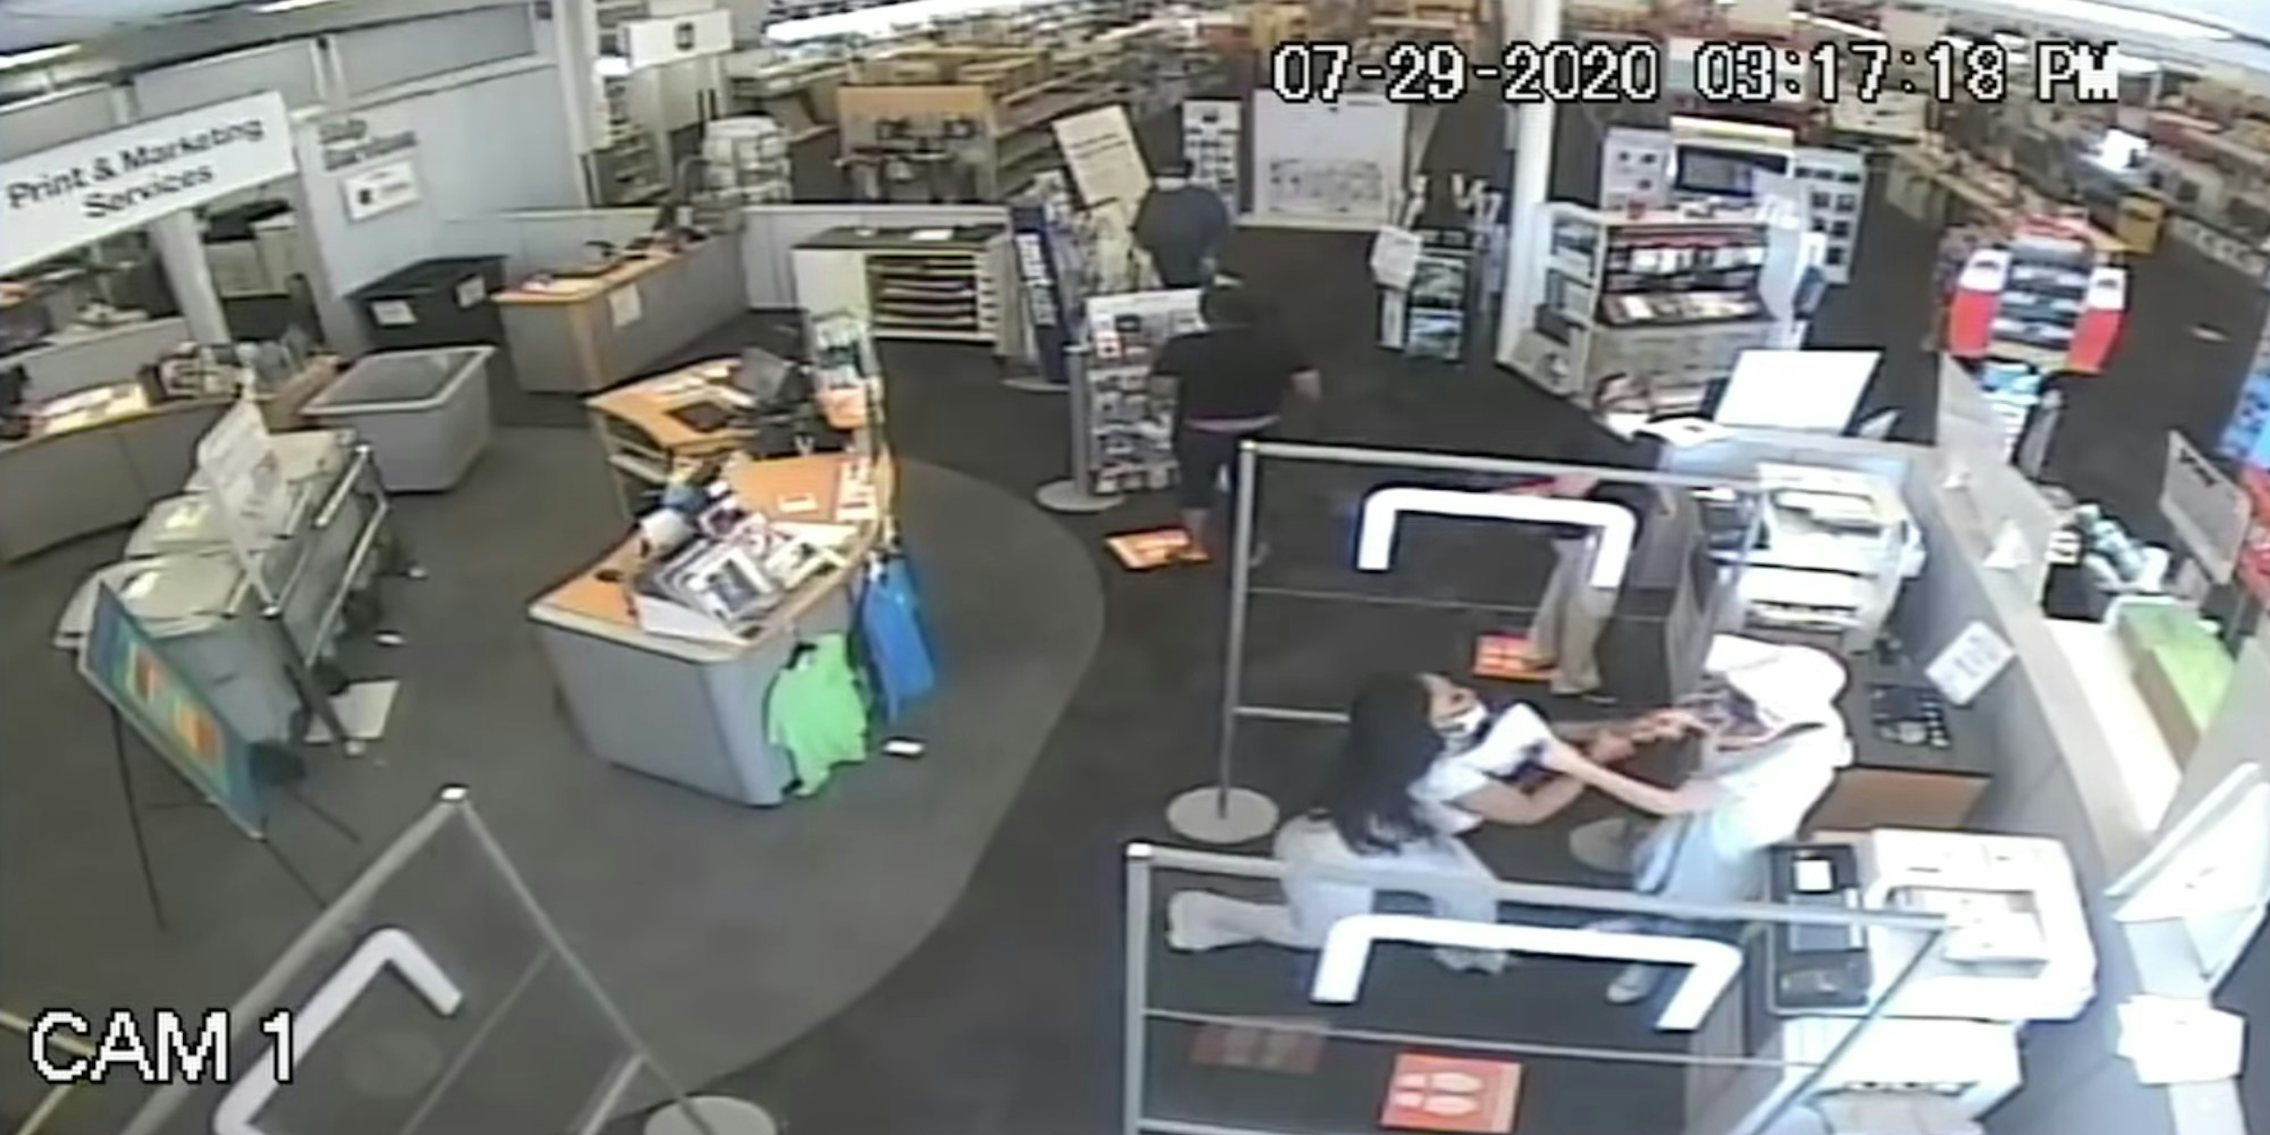 Surveillance video of an altercation at a Staples